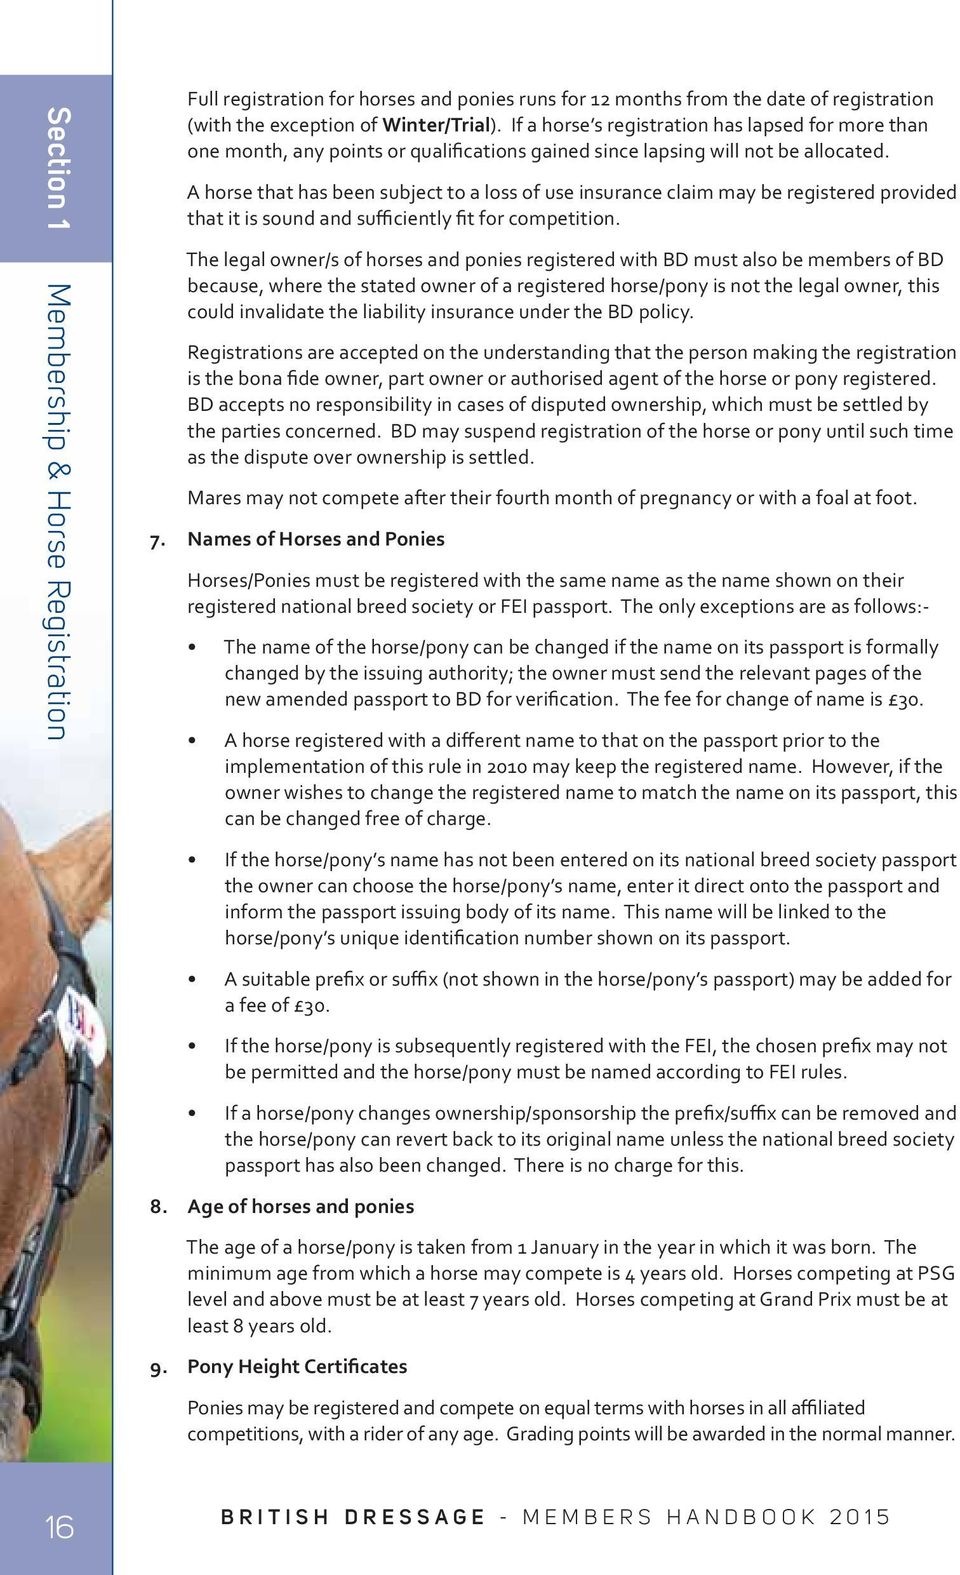 A horse that has been subject to a loss of use insurance claim may be registered provided that it is sound and sufficiently fit for competition.